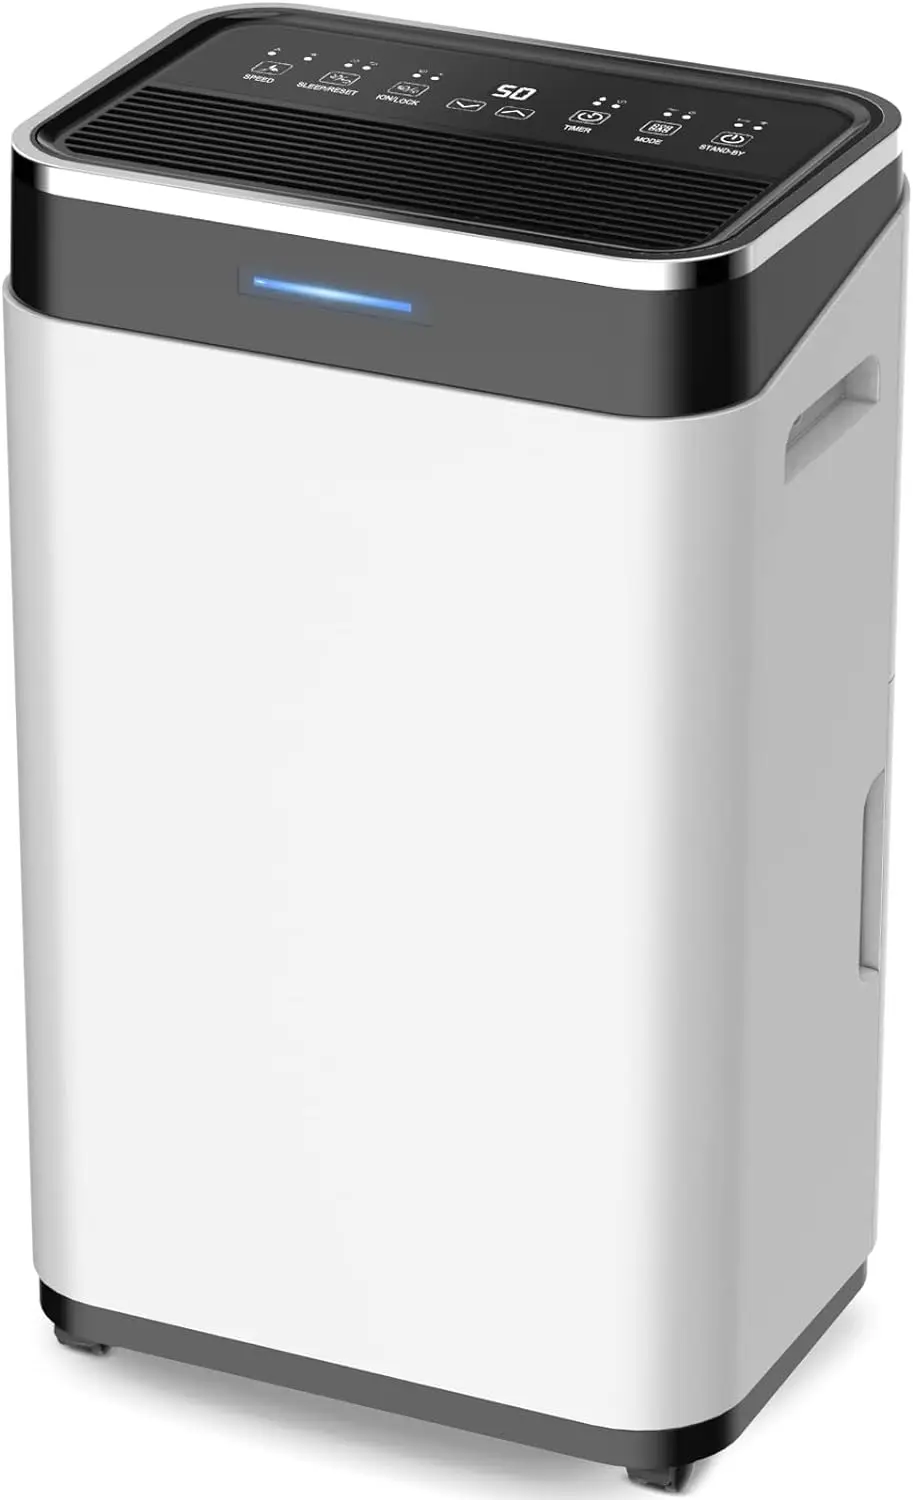 

45 Pints Dehumidifier for Home/Basement/Large Room with Drain Hose, Dehumidifiers with Auto or Manual Drainage, 3 Working Modes/